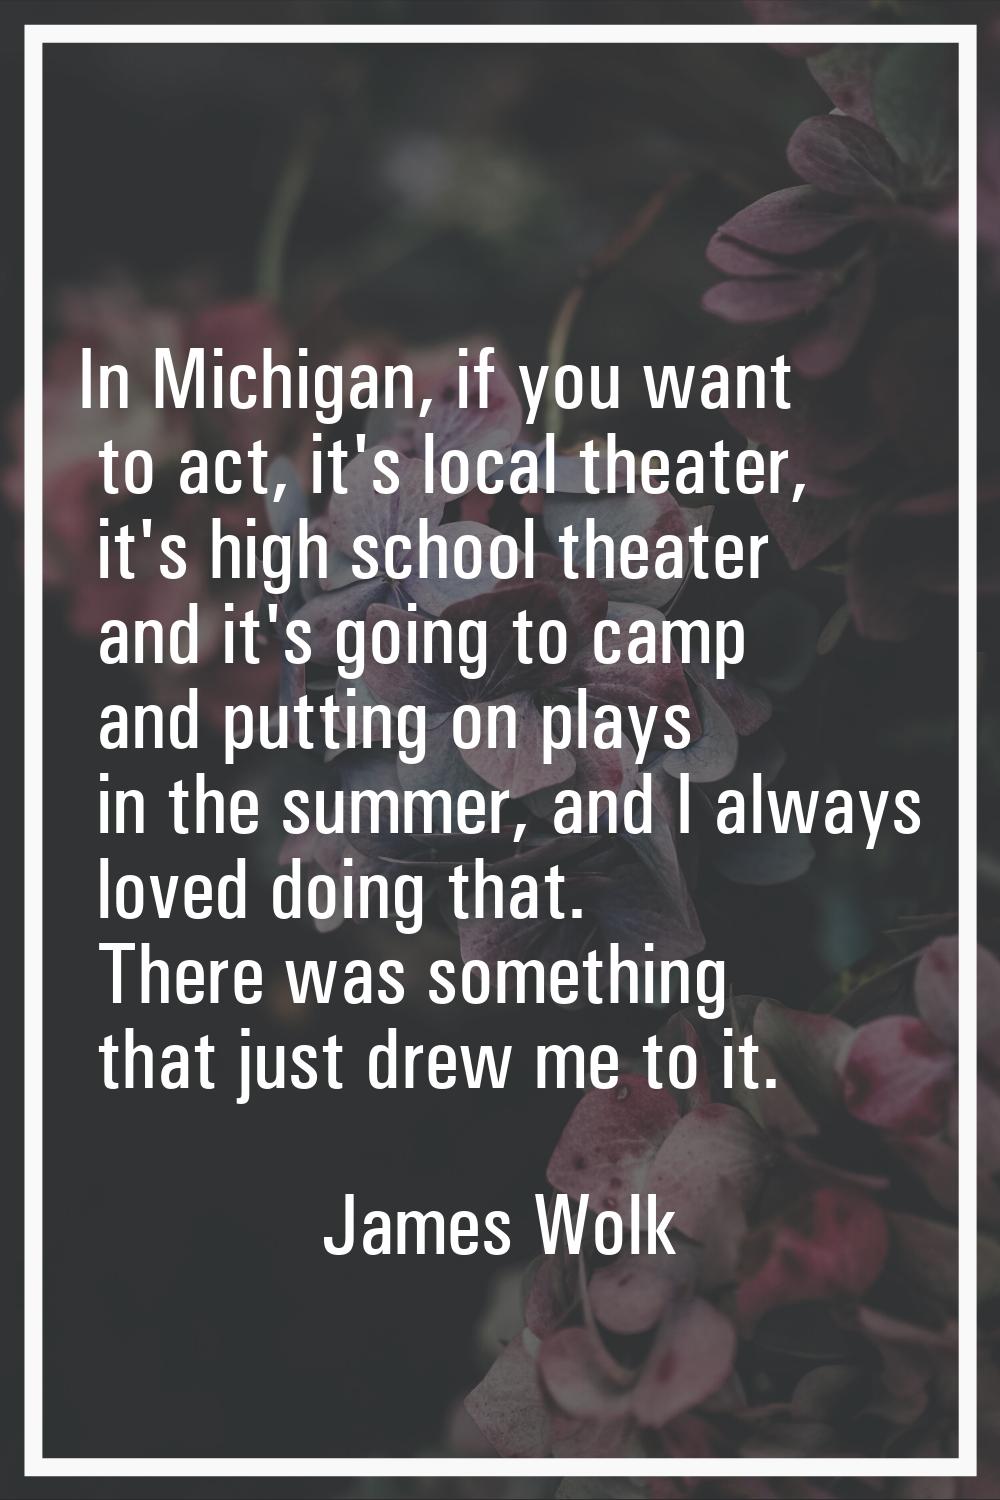 In Michigan, if you want to act, it's local theater, it's high school theater and it's going to cam